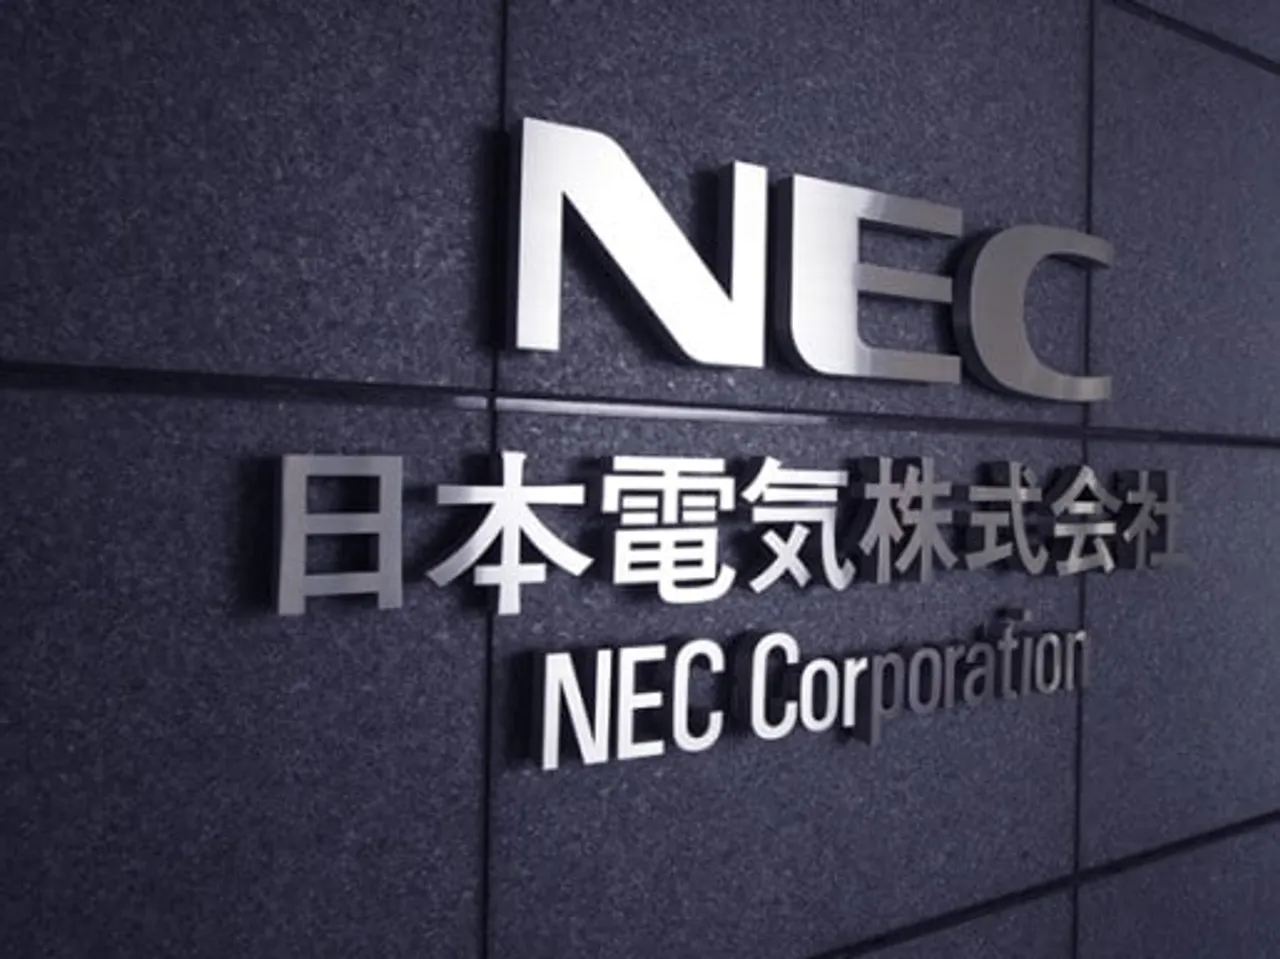 NEC Corporation and NEC Technologies India Private Limited